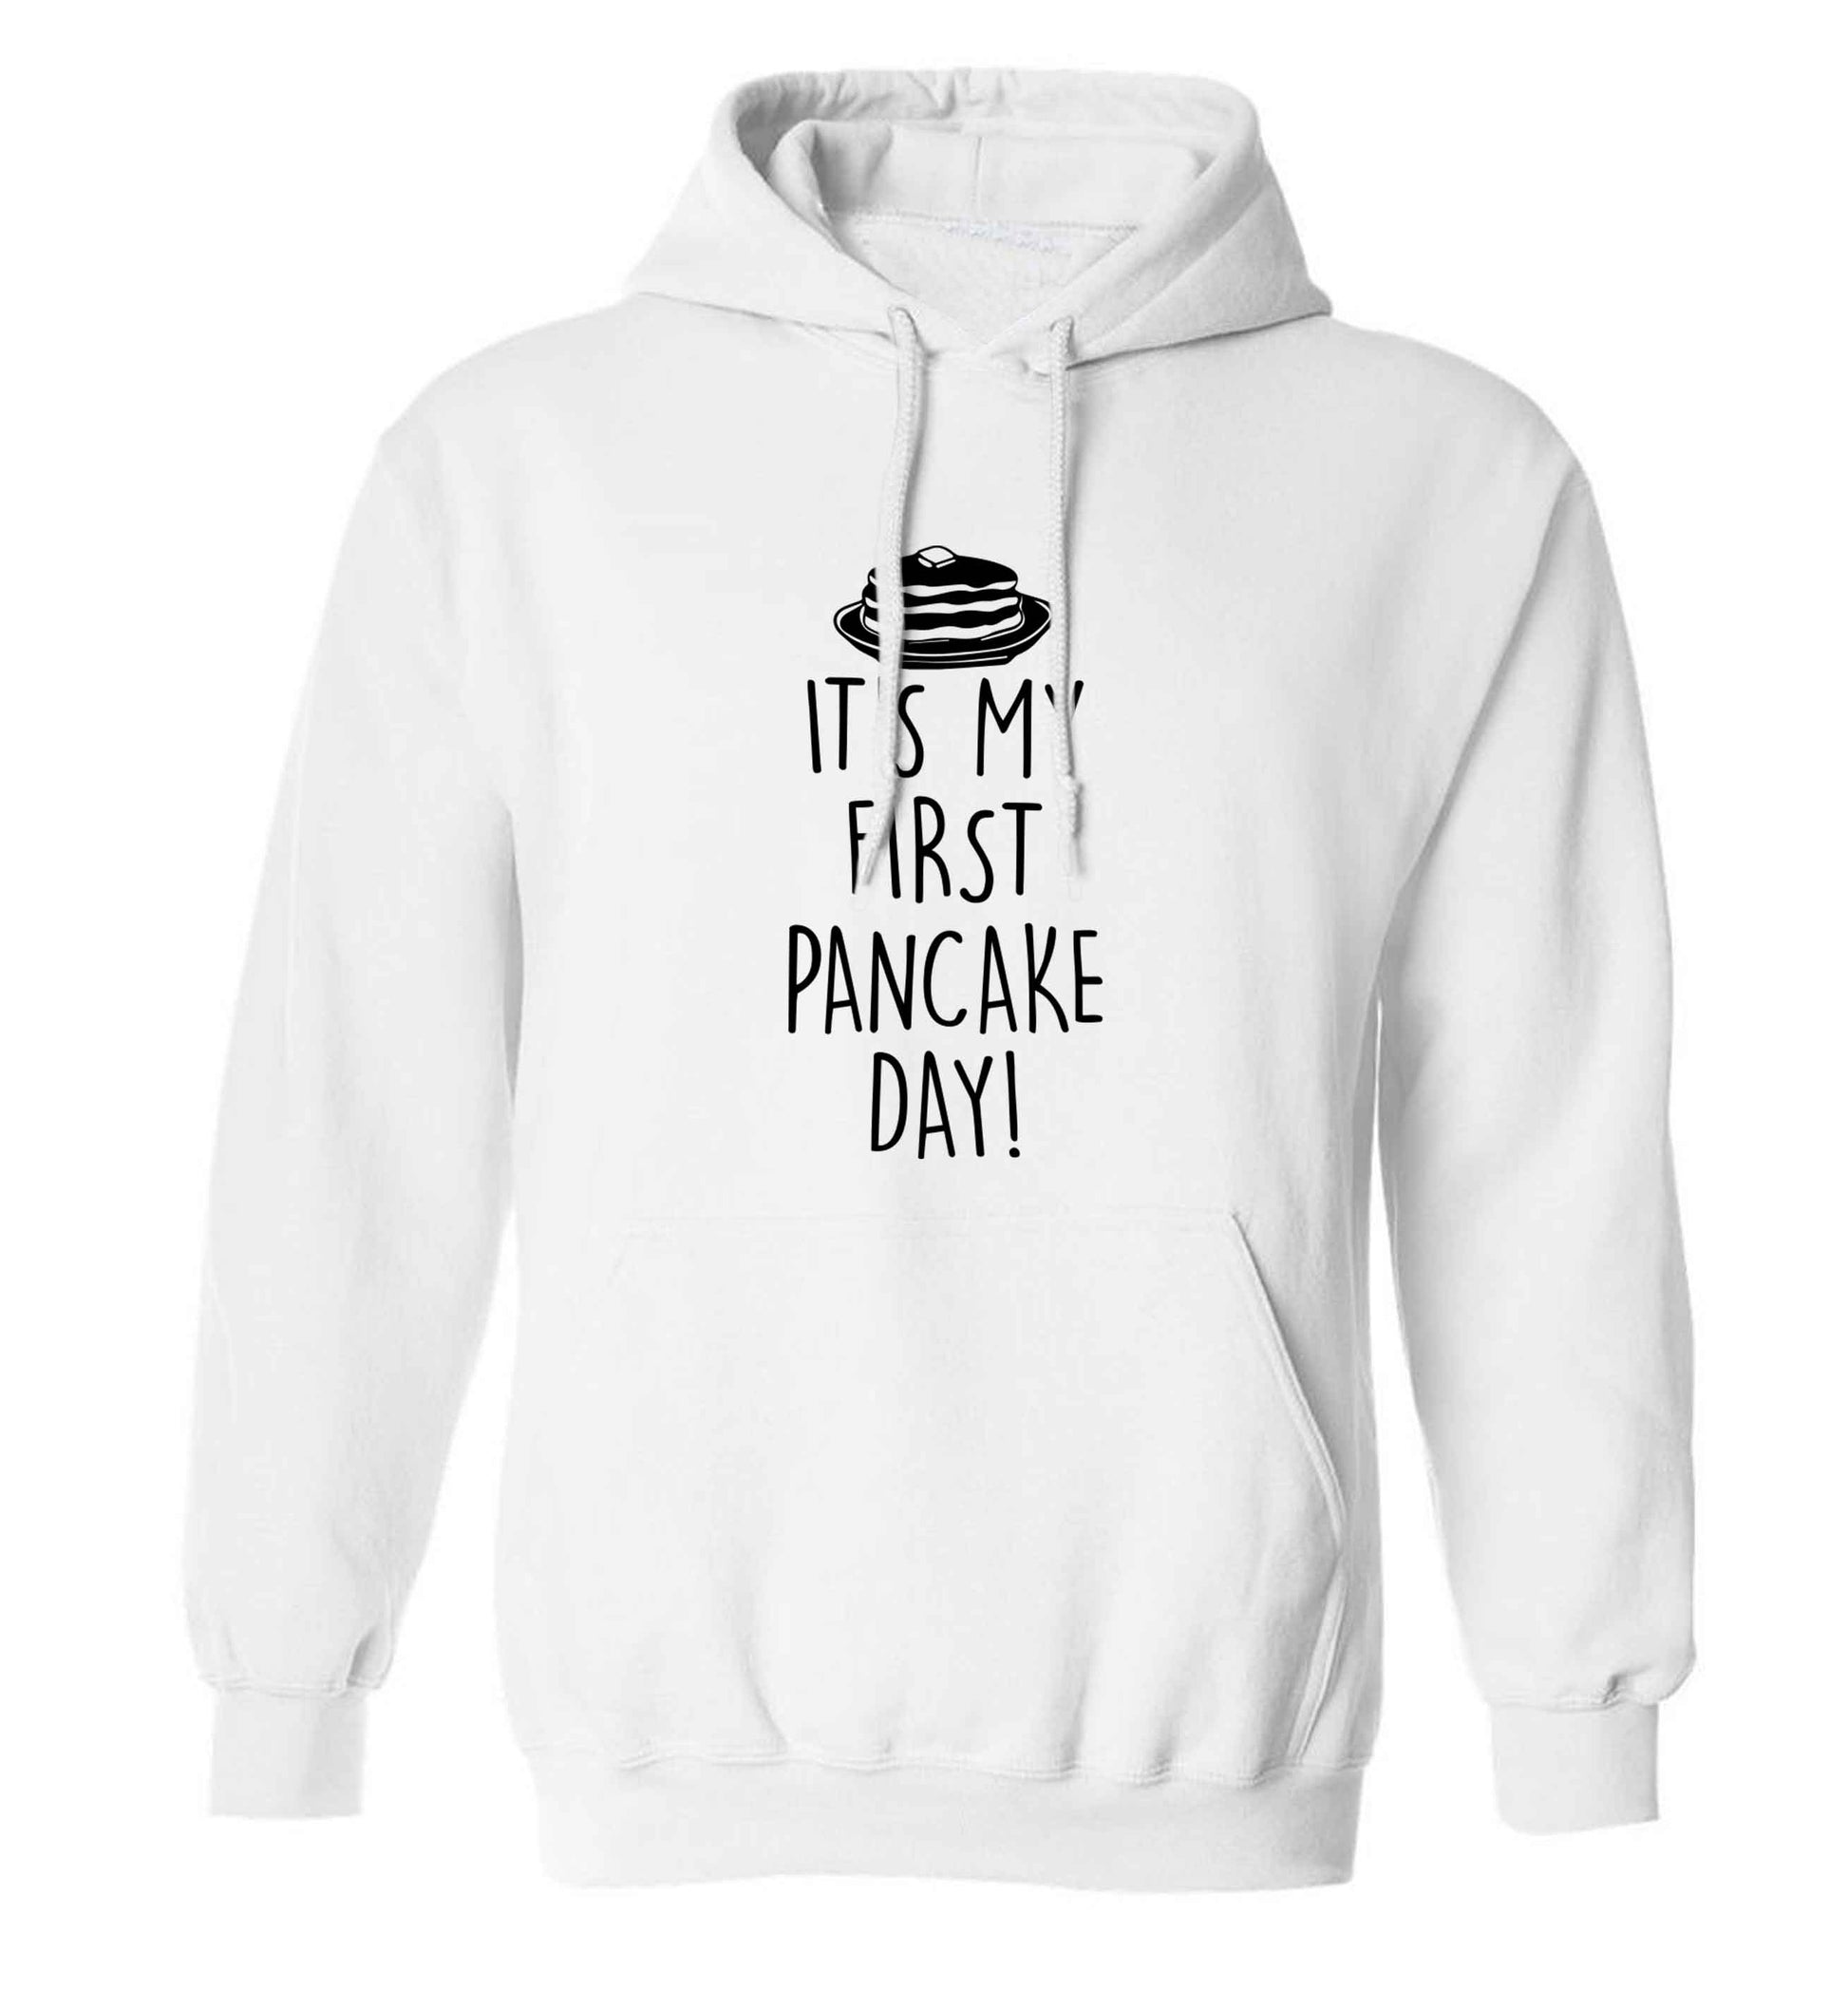 It's my first pancake day adults unisex white hoodie 2XL